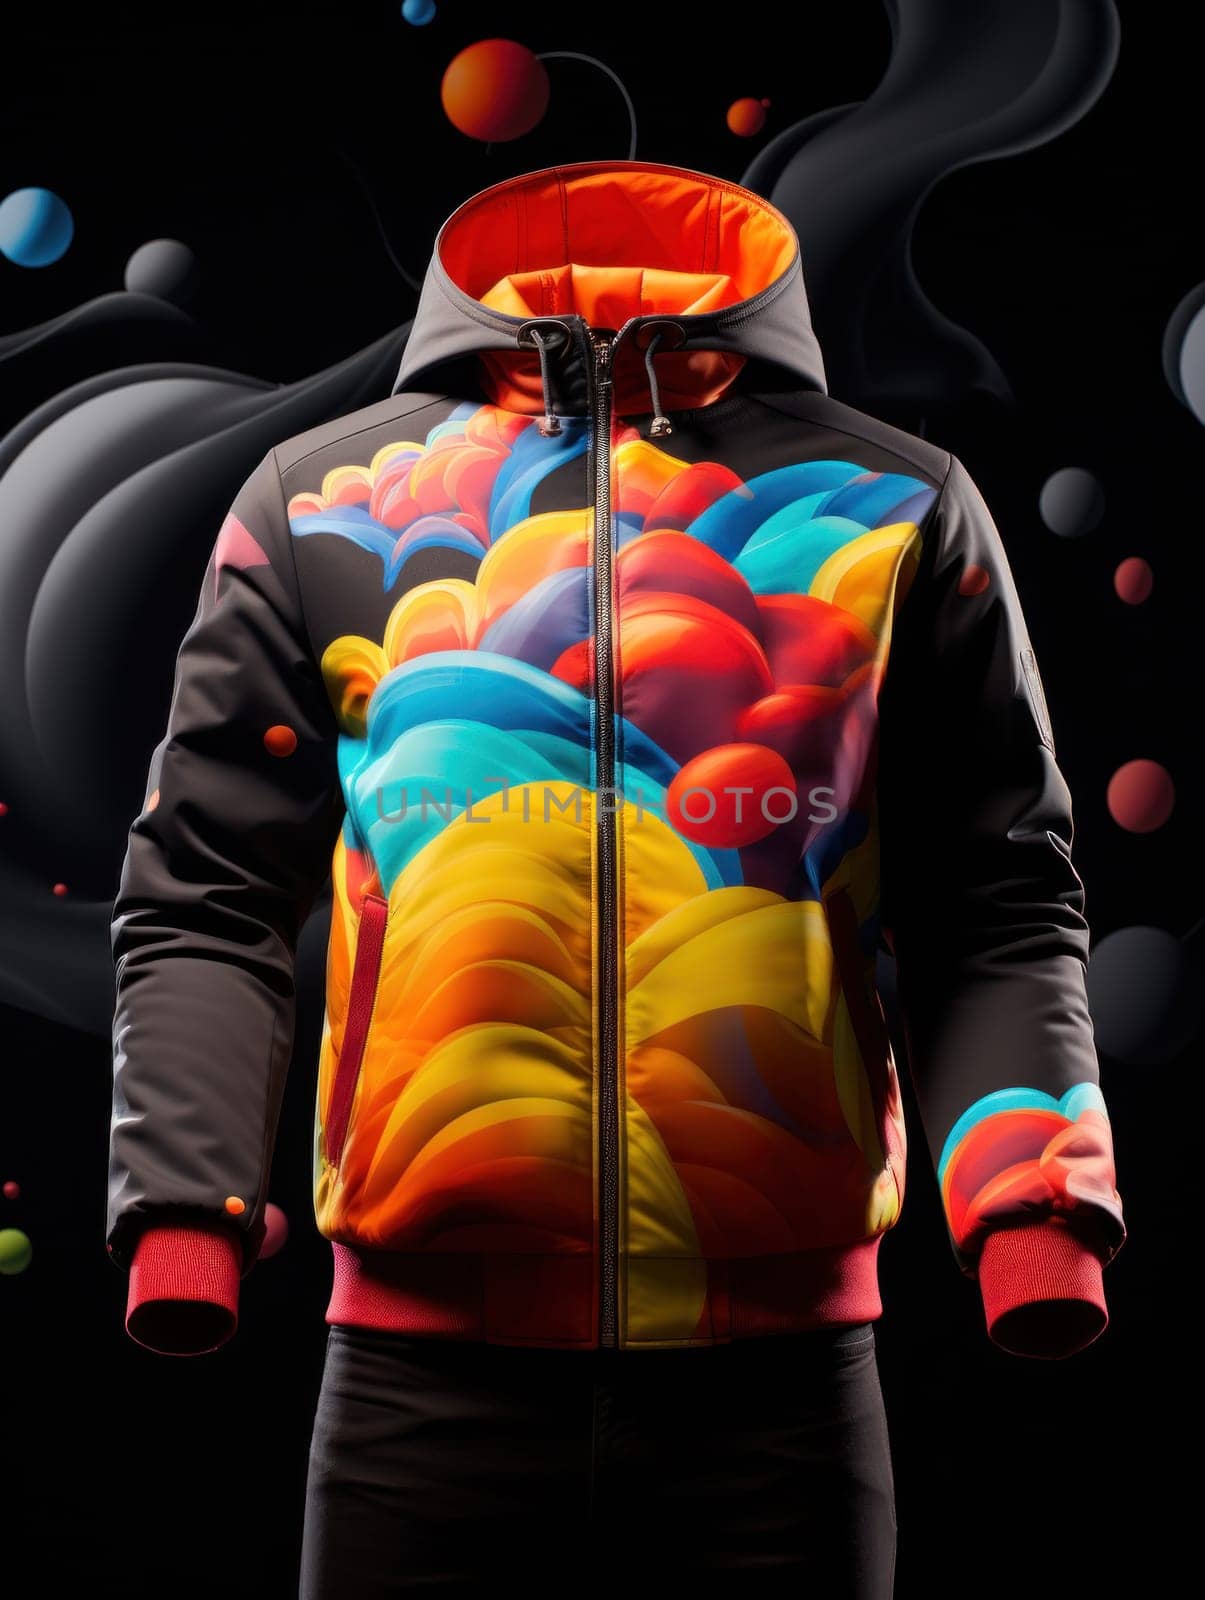 A jacket with a colorful design on it and black background, AI by starush